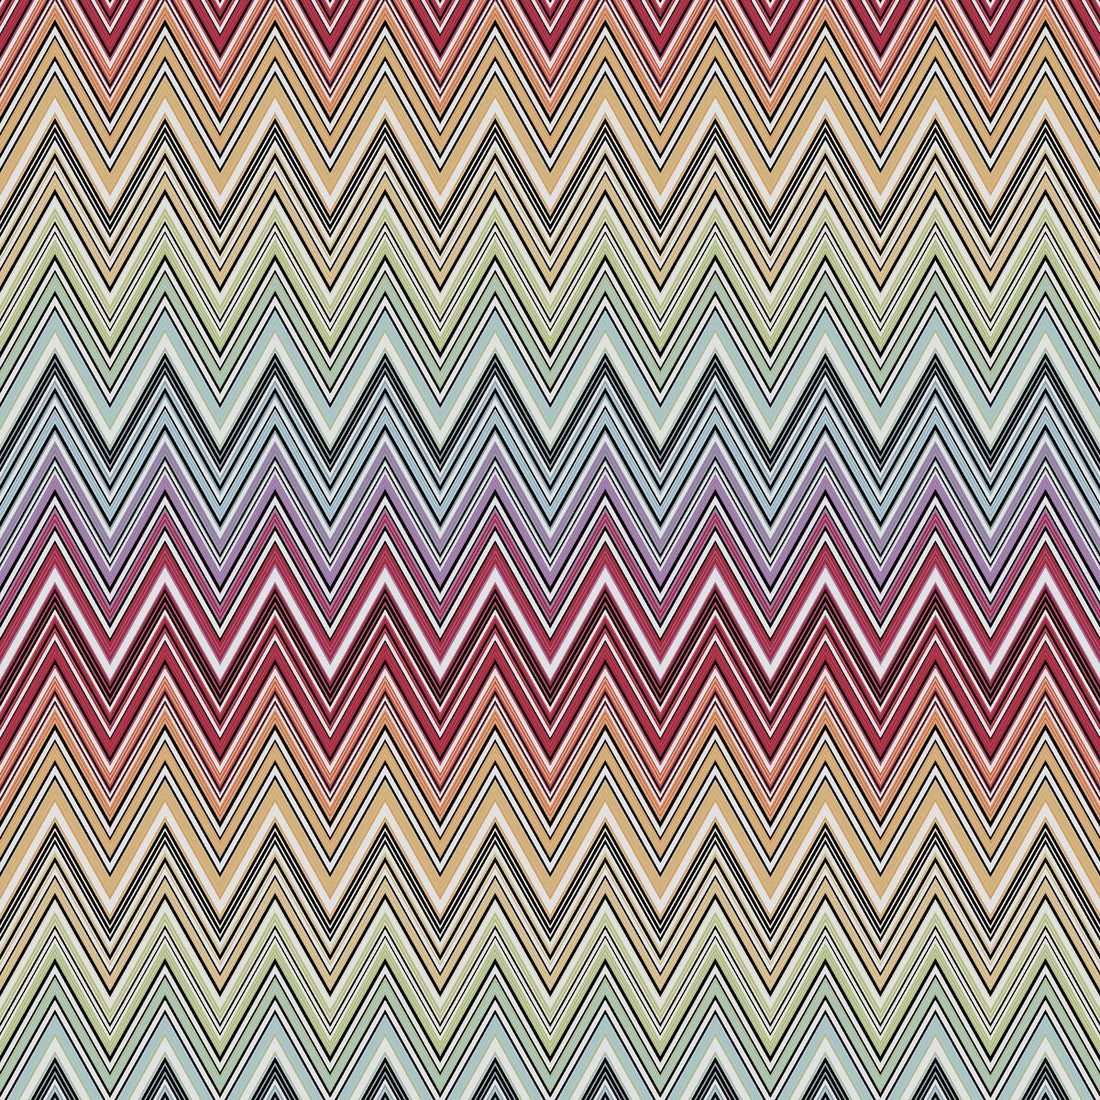 Kew Mtc Outdoor fabric in 159 color - pattern 36164.1512.0 - by Kravet Couture in the Missoni Home collection